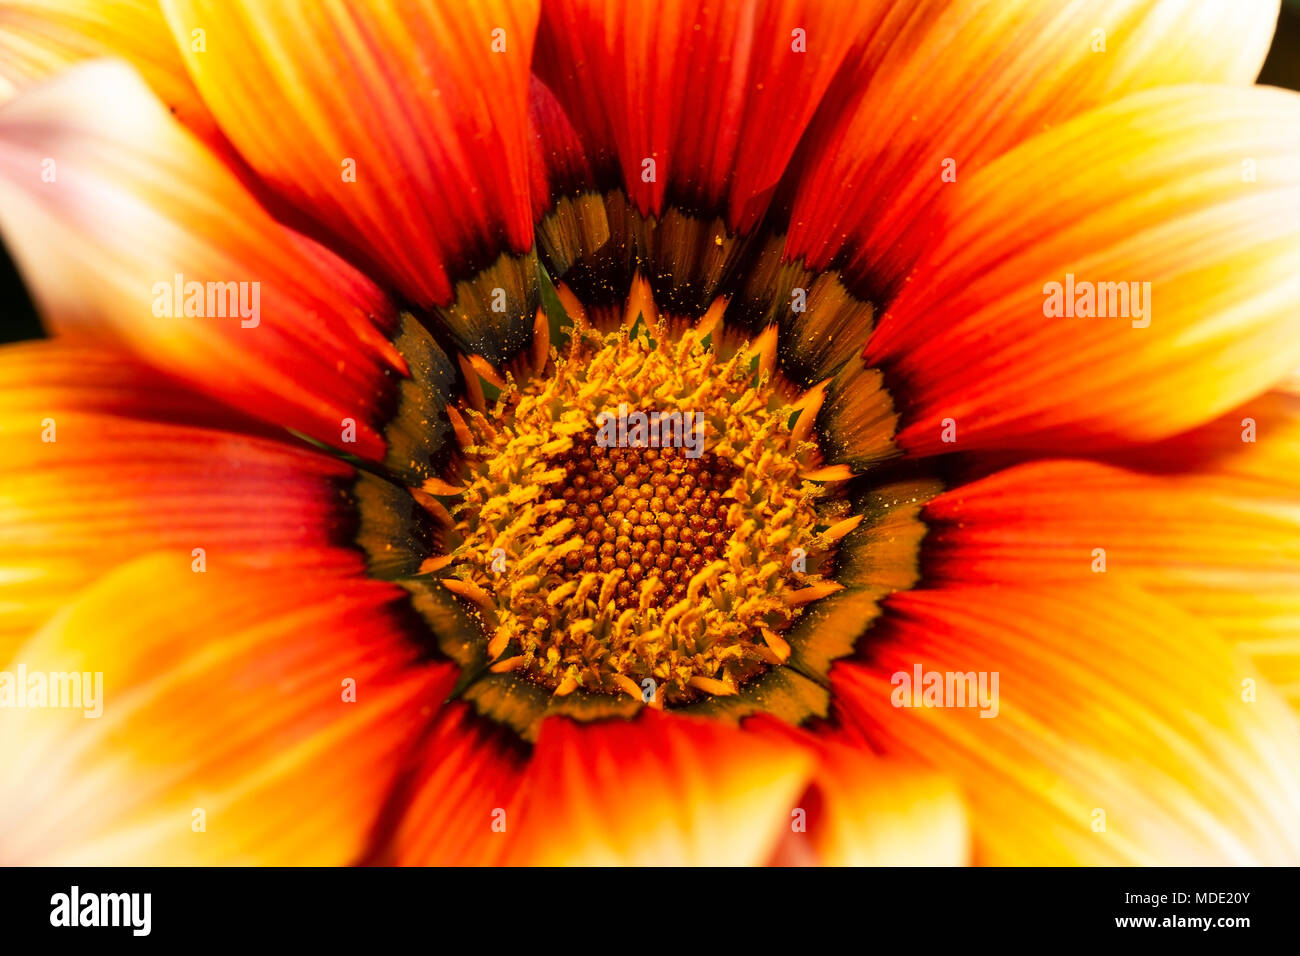 Yellow and orange flower extreme close up, flower centered in frame, vivid colors,saturated, natural light. Stock Photo